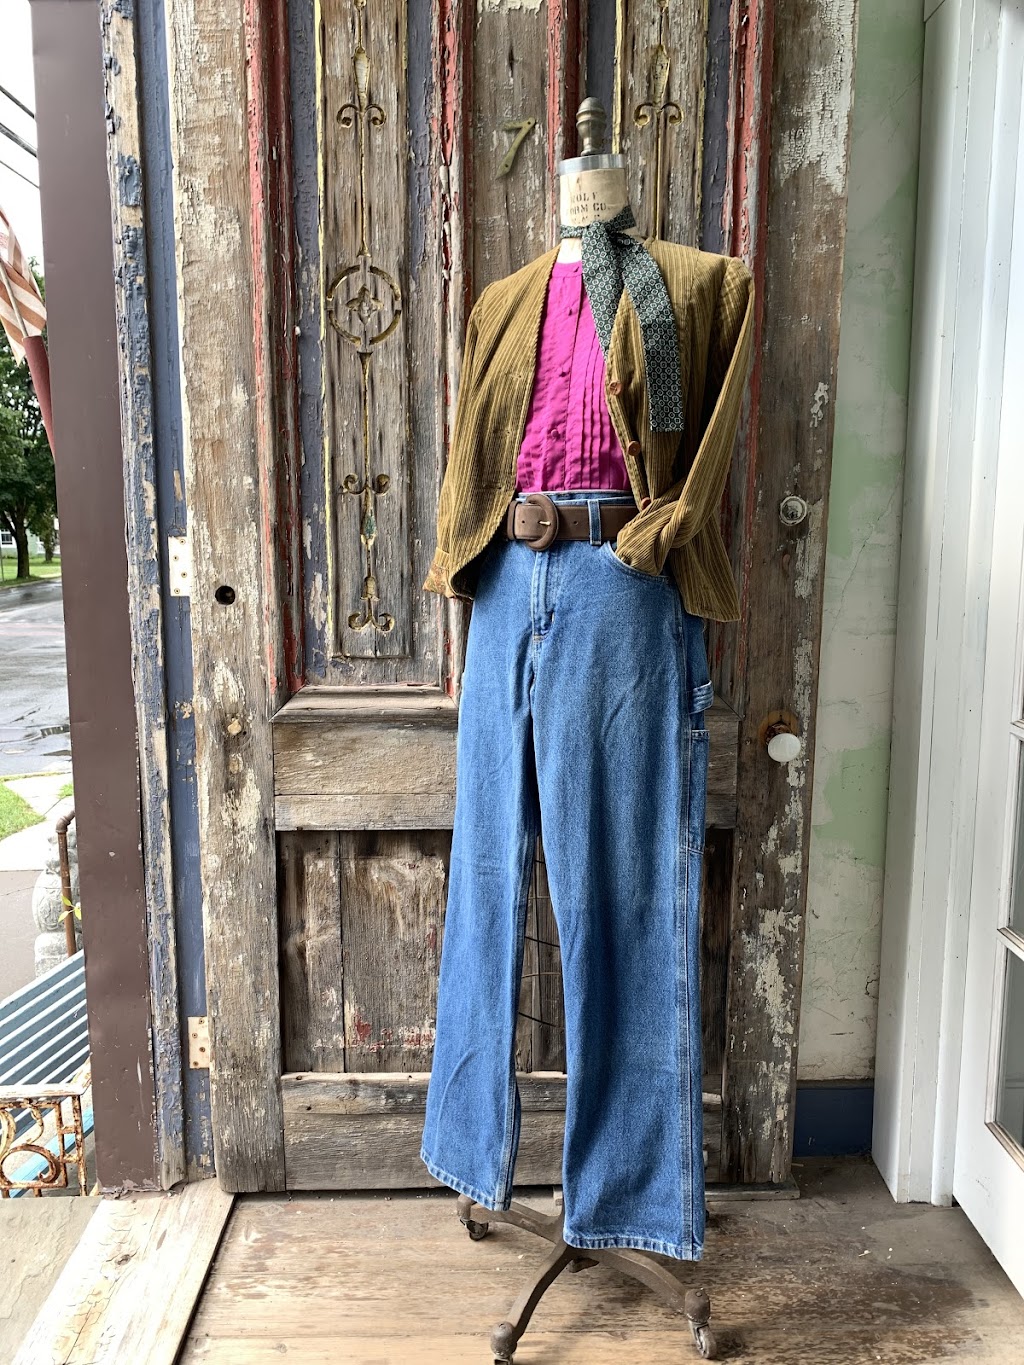 Clementine Vintage Clothing | 7 Main St, Andes, NY 13731 | Phone: (845) 676-3888